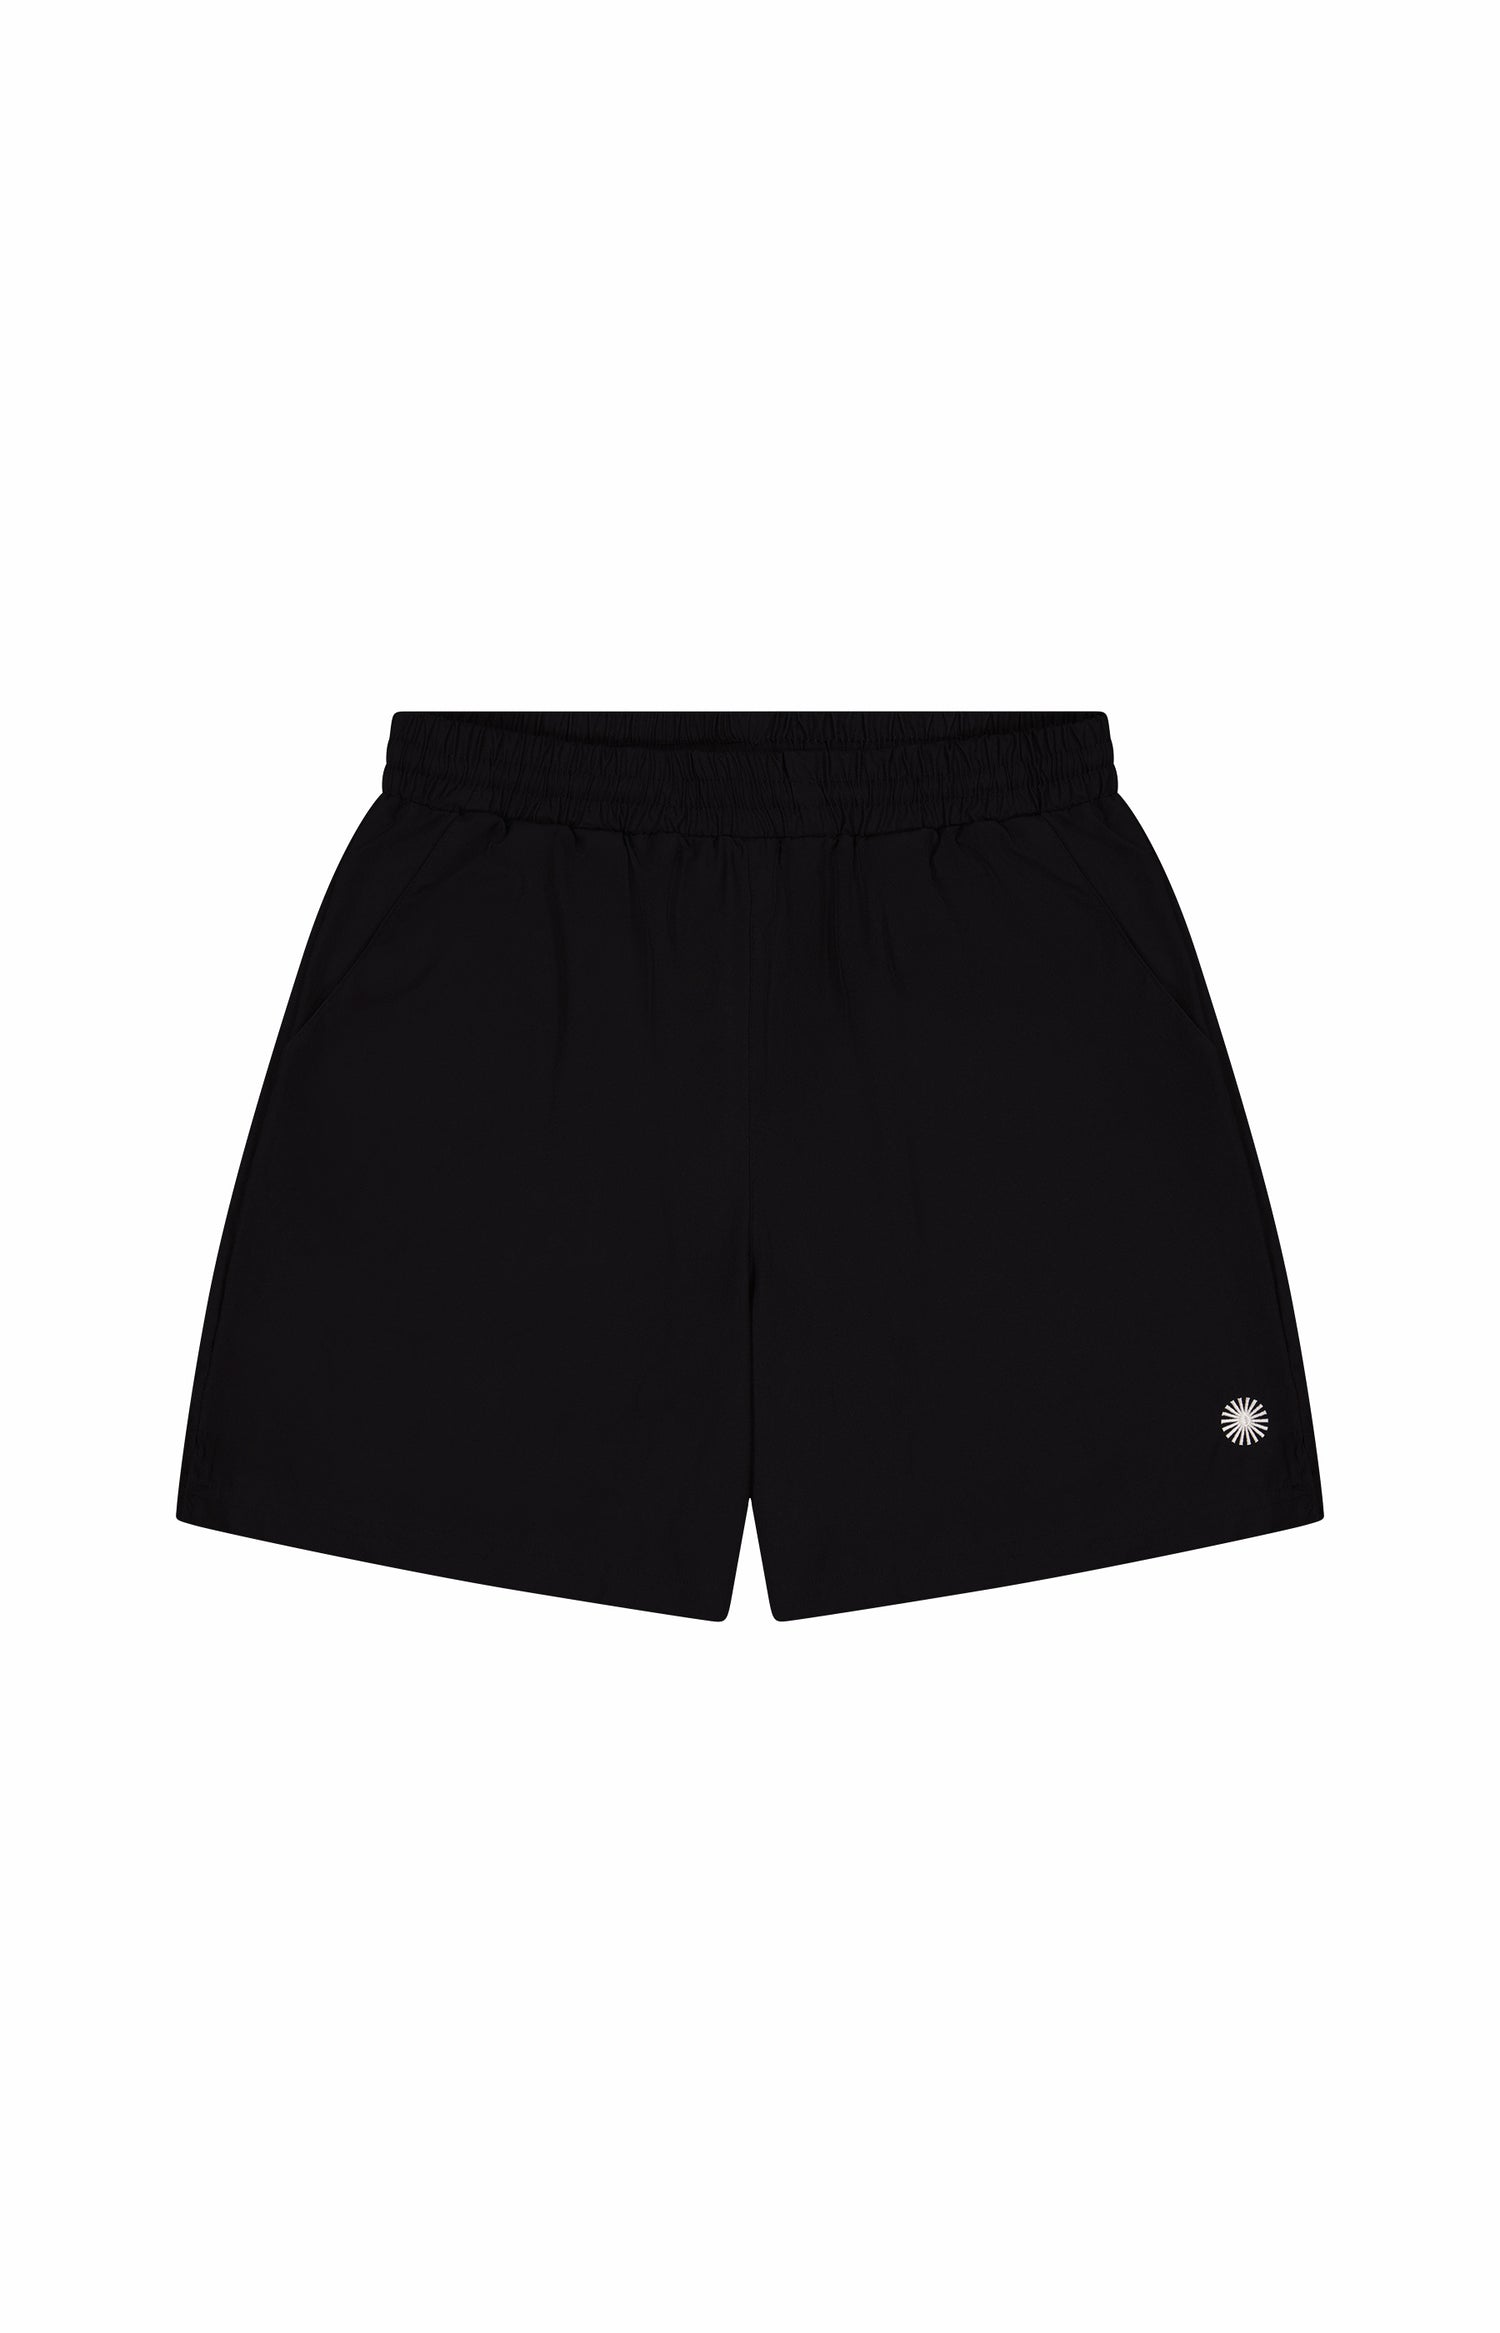 black nylon shorts with small beige sun logo, two pockets, and elastic waistband